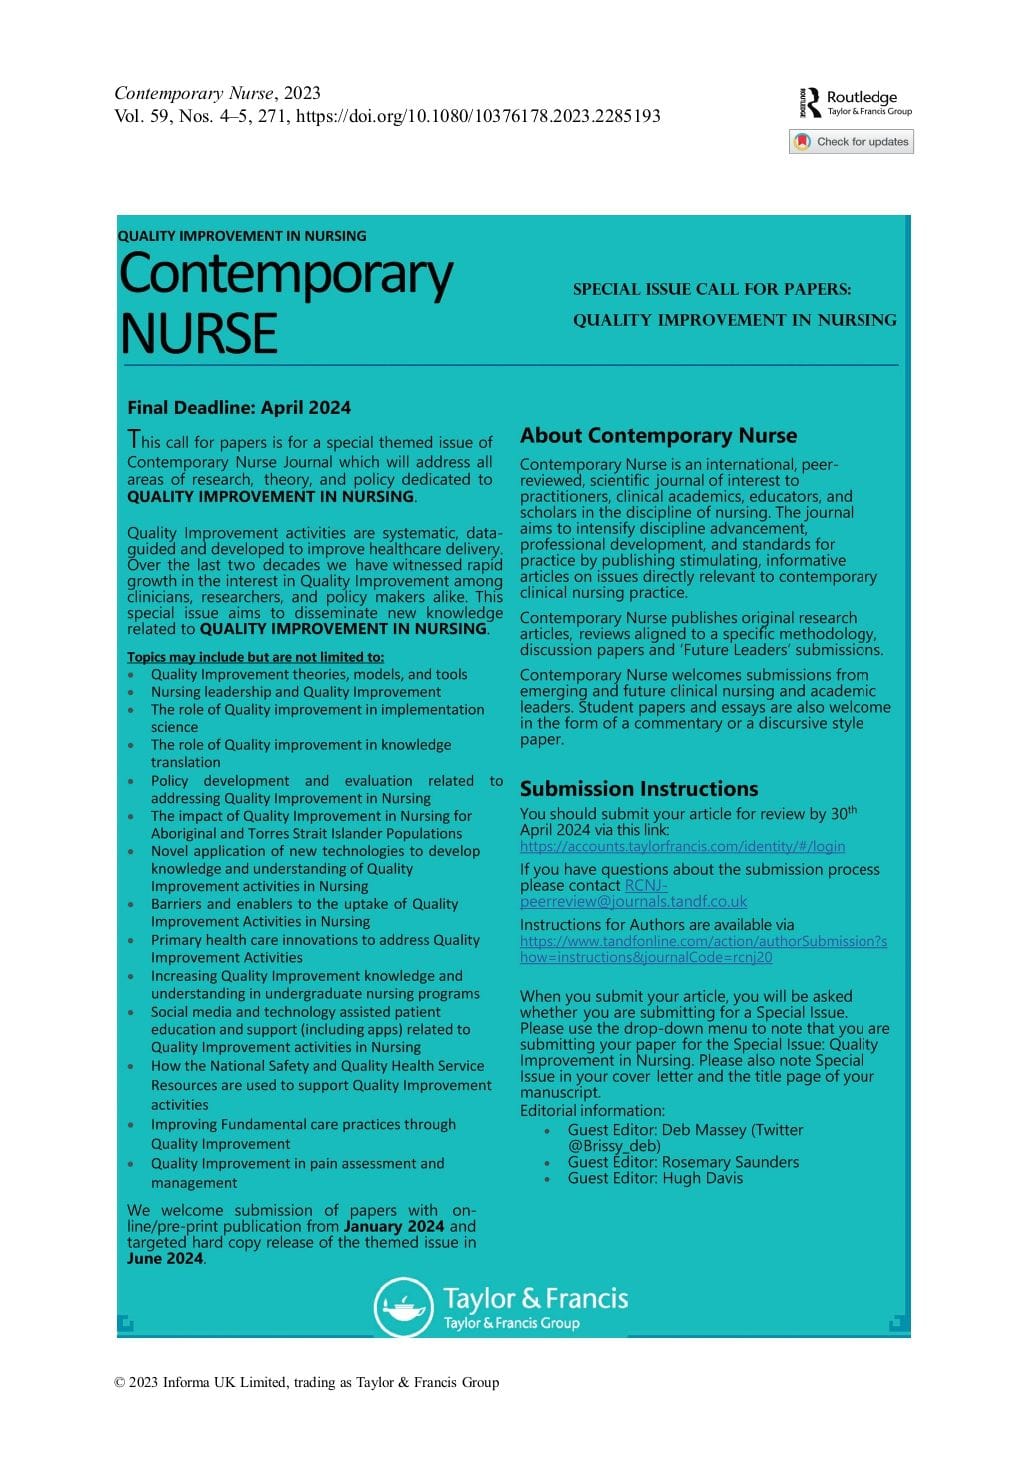 Shape the Future of Nursing: Your Opportunity to Contribute to Contemporary Nurse Journal